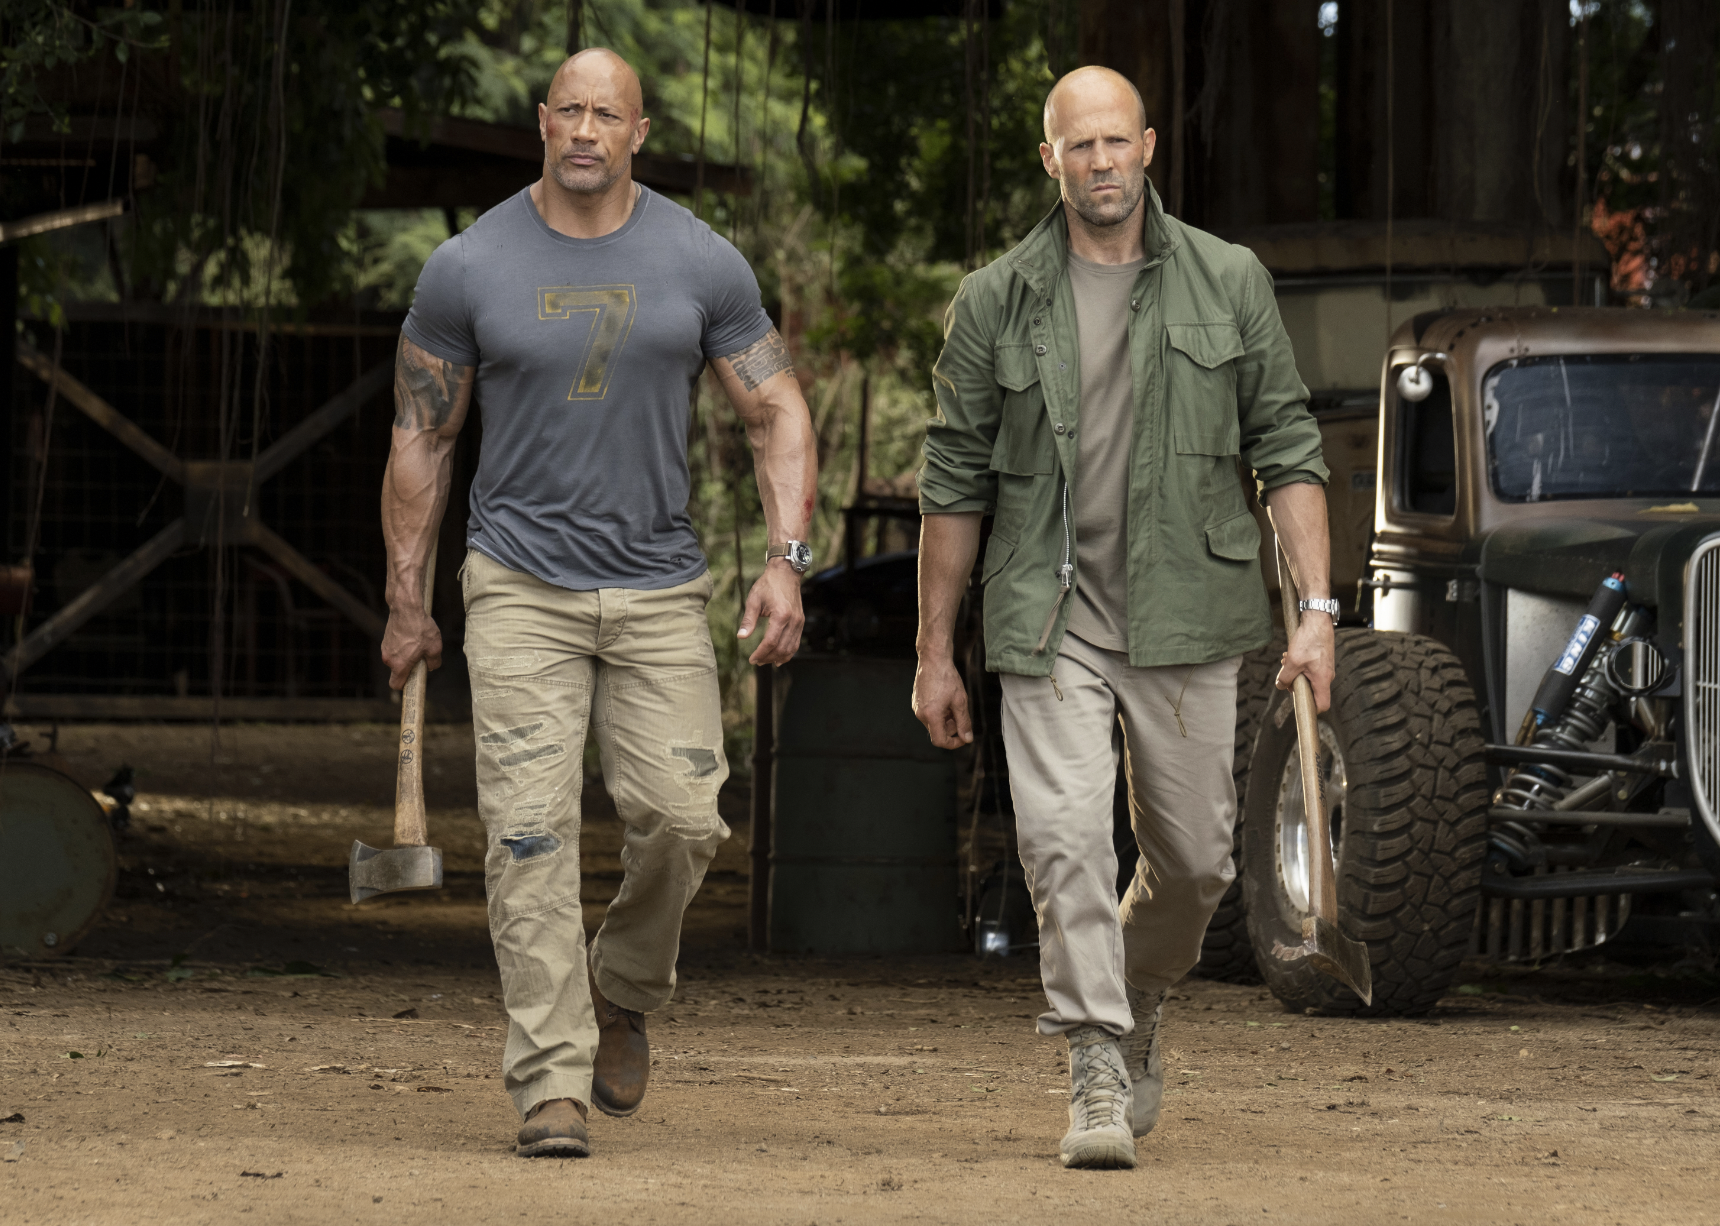 Jason Statham and Dwayne Johnson in "Fast & Furious Presents: Hobbs & Shaw"